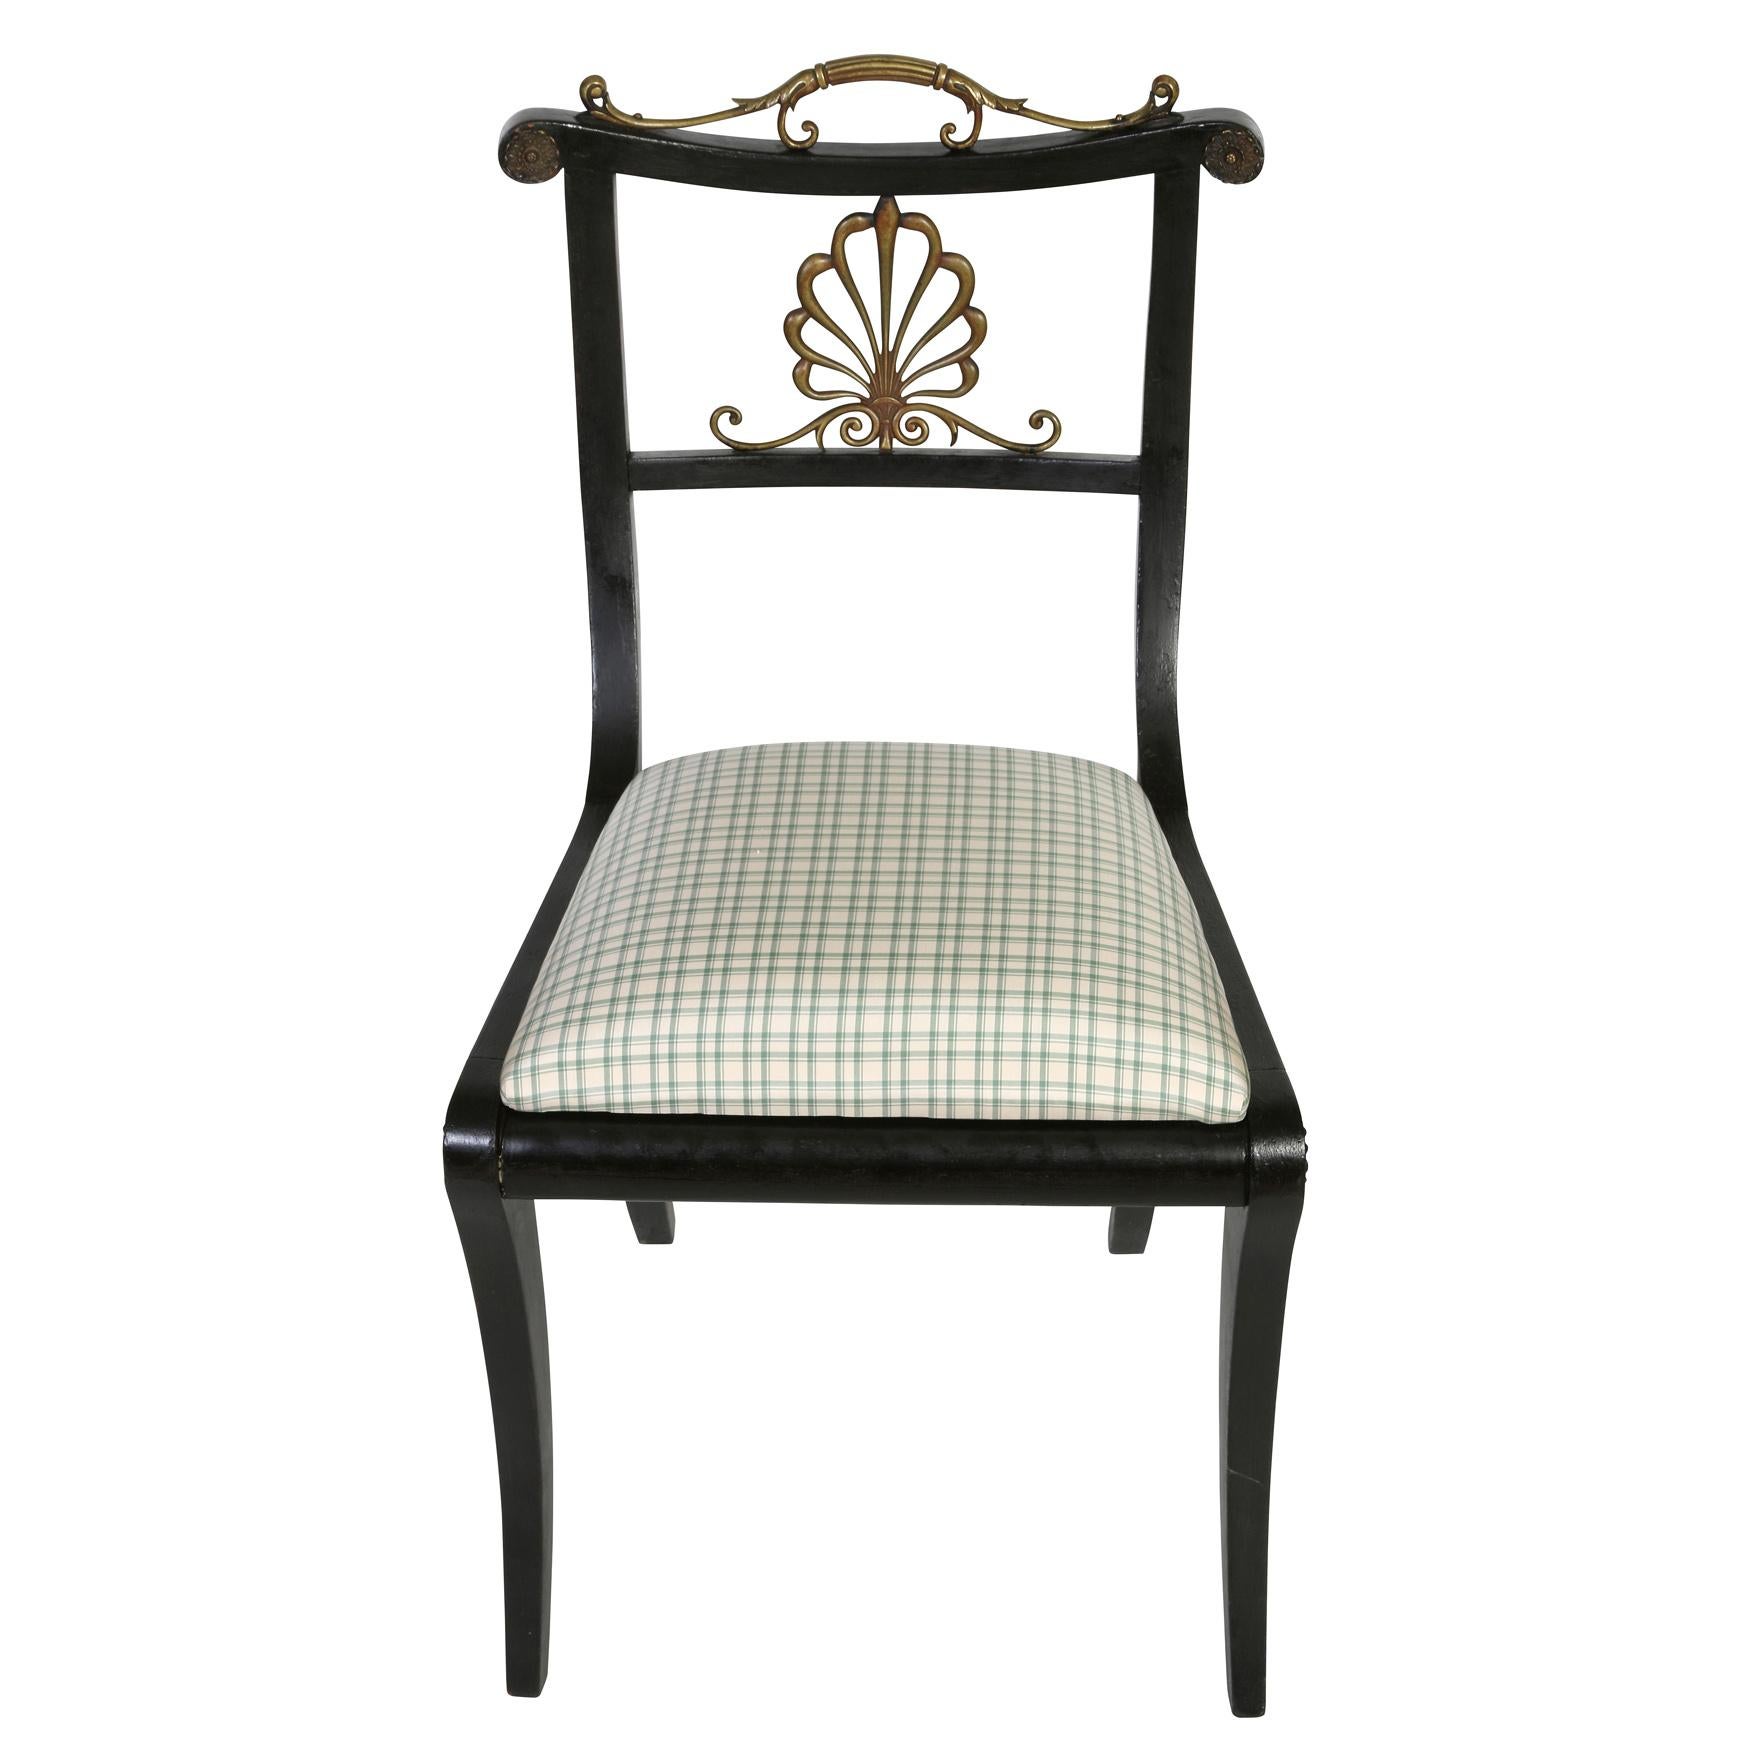 A vintage set of four ebony Regency style dining chairs with newly upholstered silk check cushions in blue on a cream background.  The four chairs have brass details on the chair crest and back with a brass shell and swirl motif.  A traditional set